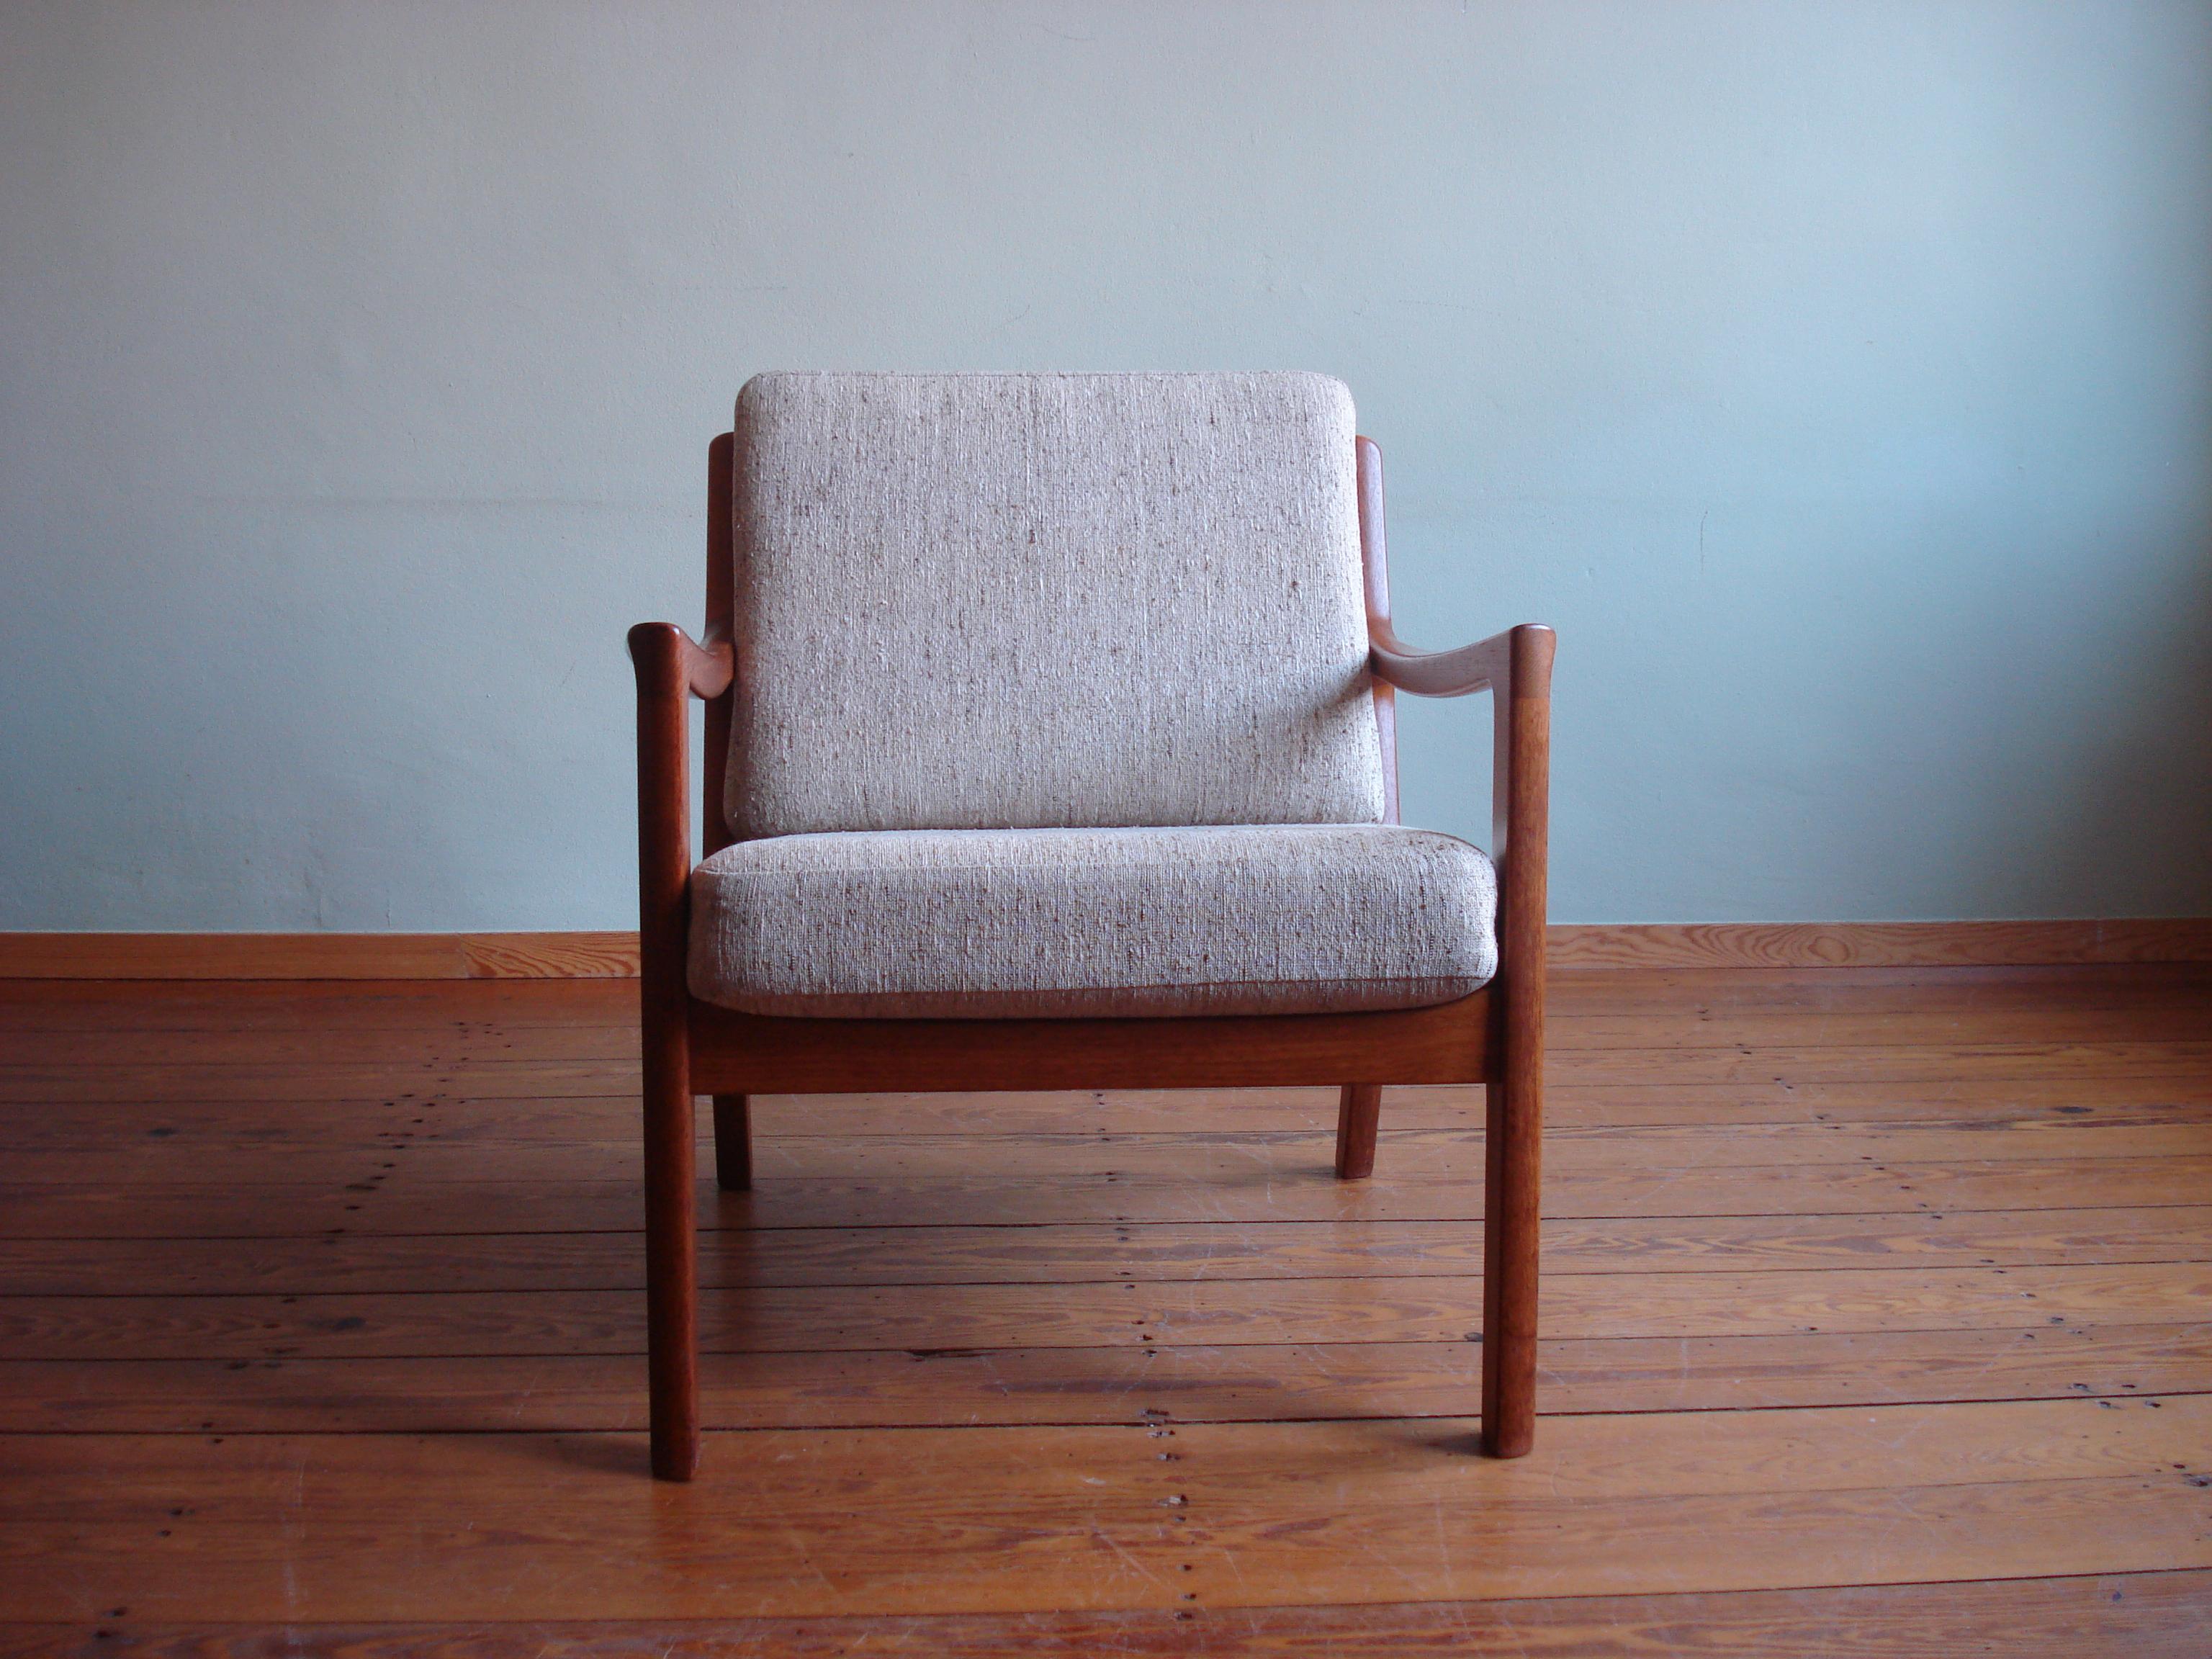 Beautiful Senator Armchair, designed by Ole Wanscher for Poul Jeppesen.
Made in Denmark and designed in the mid 50s. 

This version comes in solid teak wood with coarse, cream-colored cushions. 
Some minor scratches as pictured but in very nice